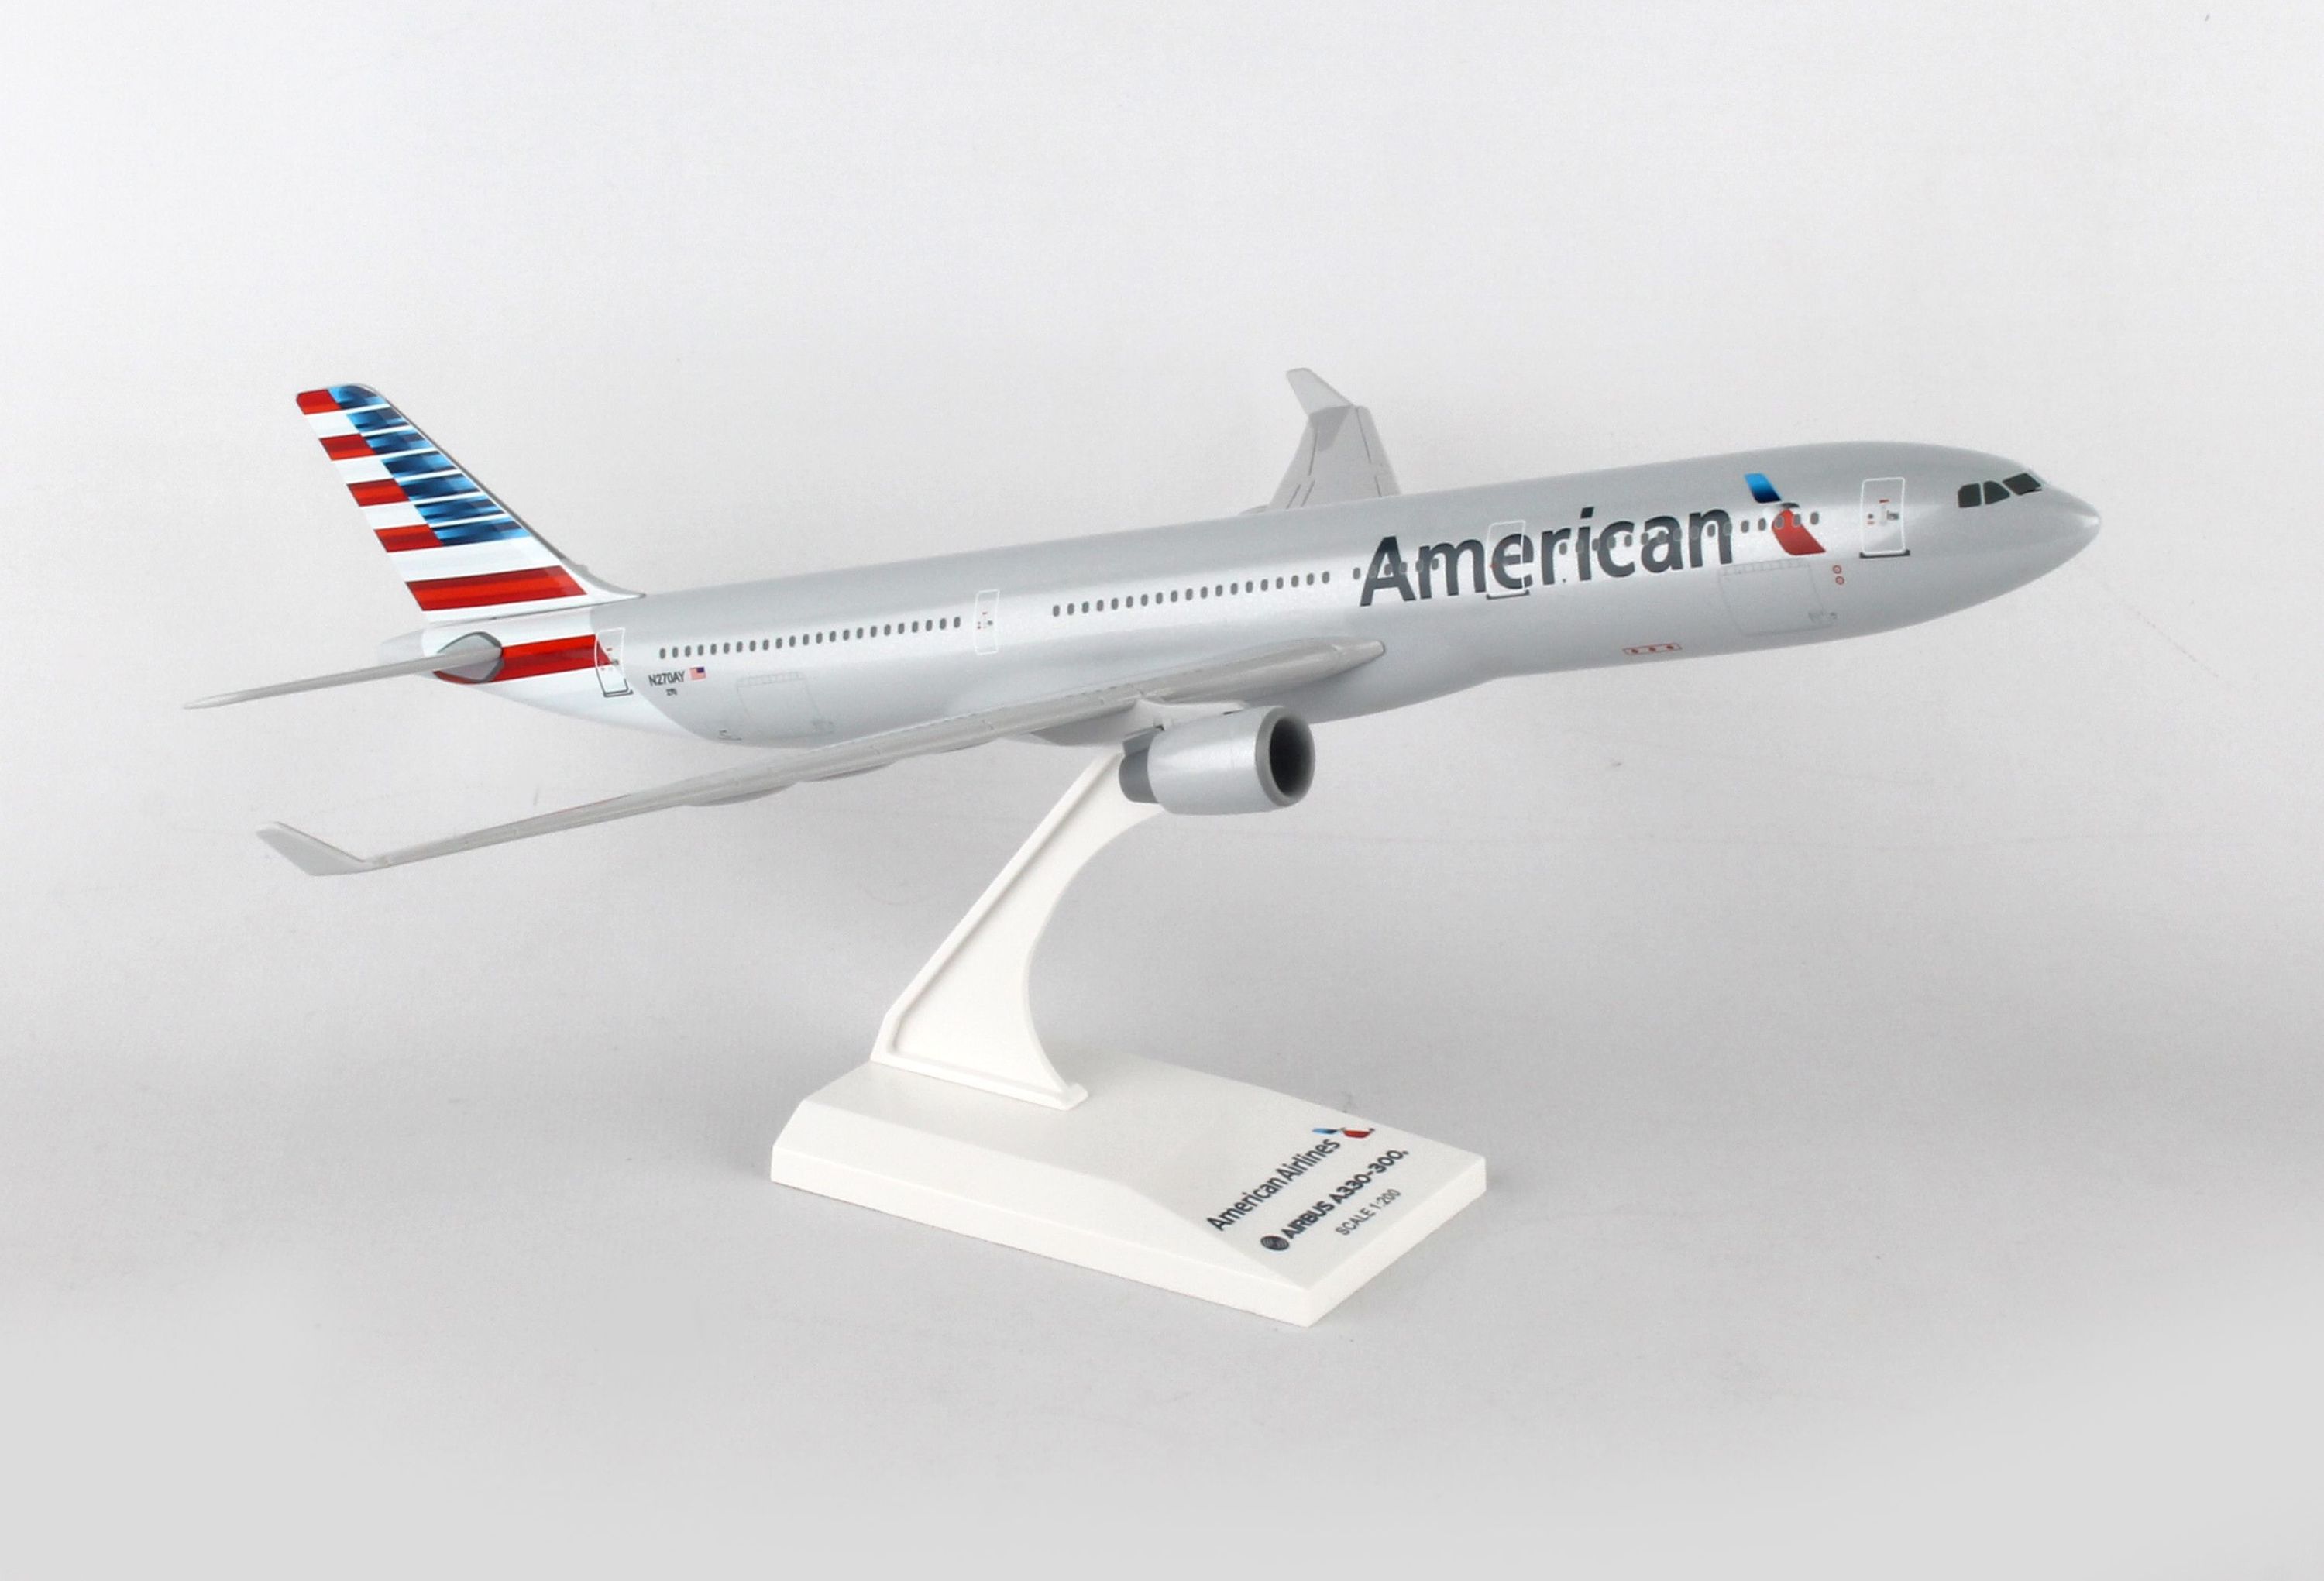 SkyMarks Flugzeugmodell American Airlines Airbus A330-300 Maßstab 1:200